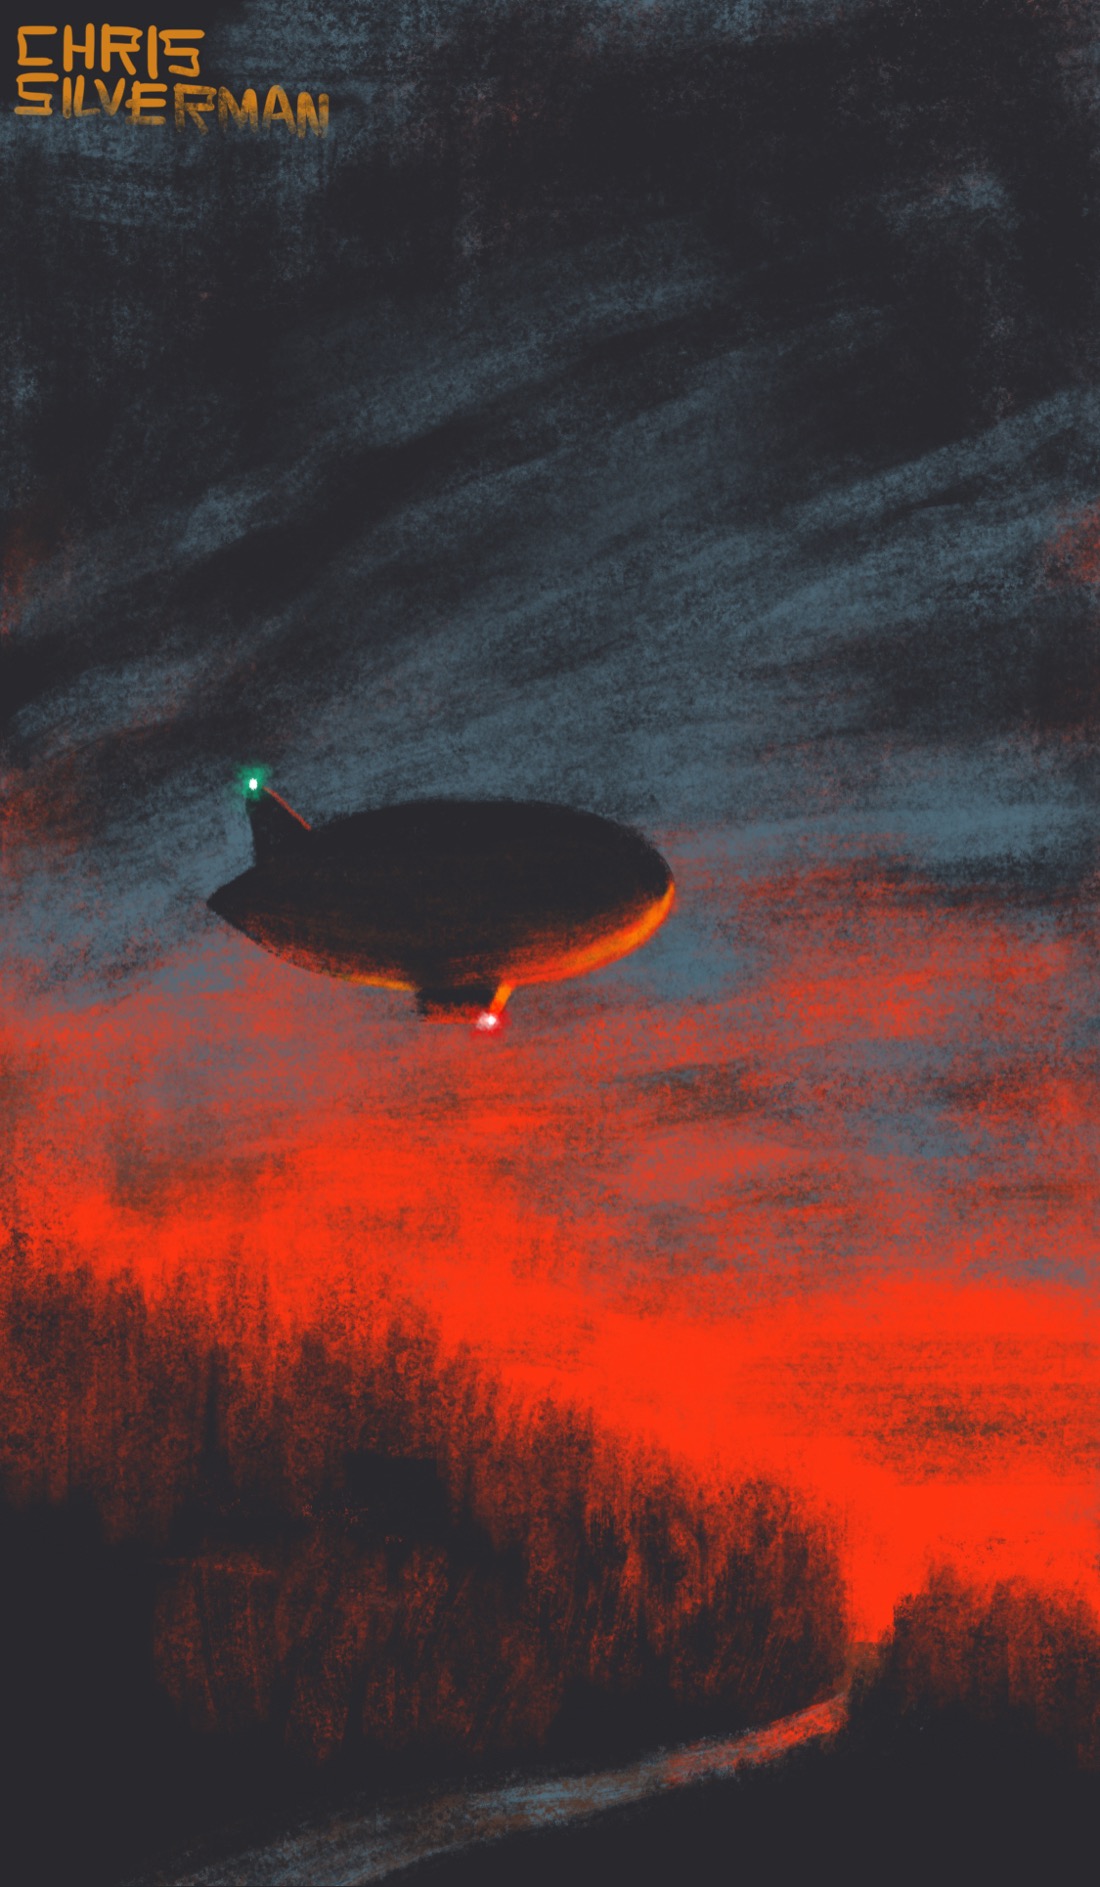 A heavily wooded black skyline, with a small road cutting through it. It's either sunrise or sunset, and the horizon is a blazing red, giving way to heavy slate-gray clouds. Hanging in the sky above the trees is a small dirigible, reflecting the red glow. There is a small, glowing green light on its top tailfin, and a red light on the basket.